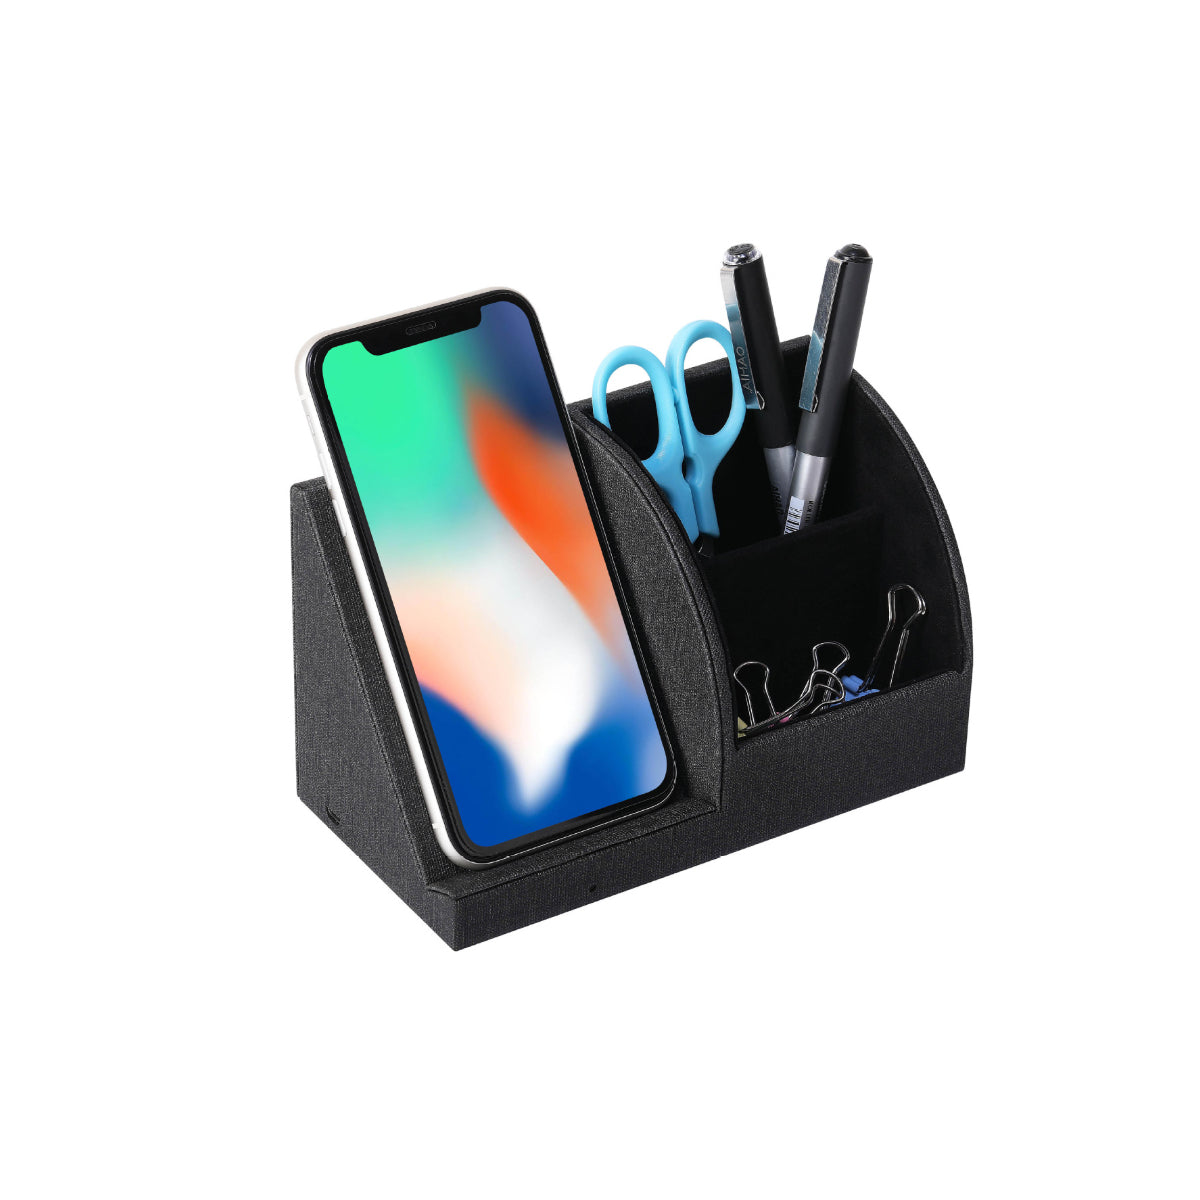 Soho Desk Organizer And Wireless Phone Charger by VistaShops